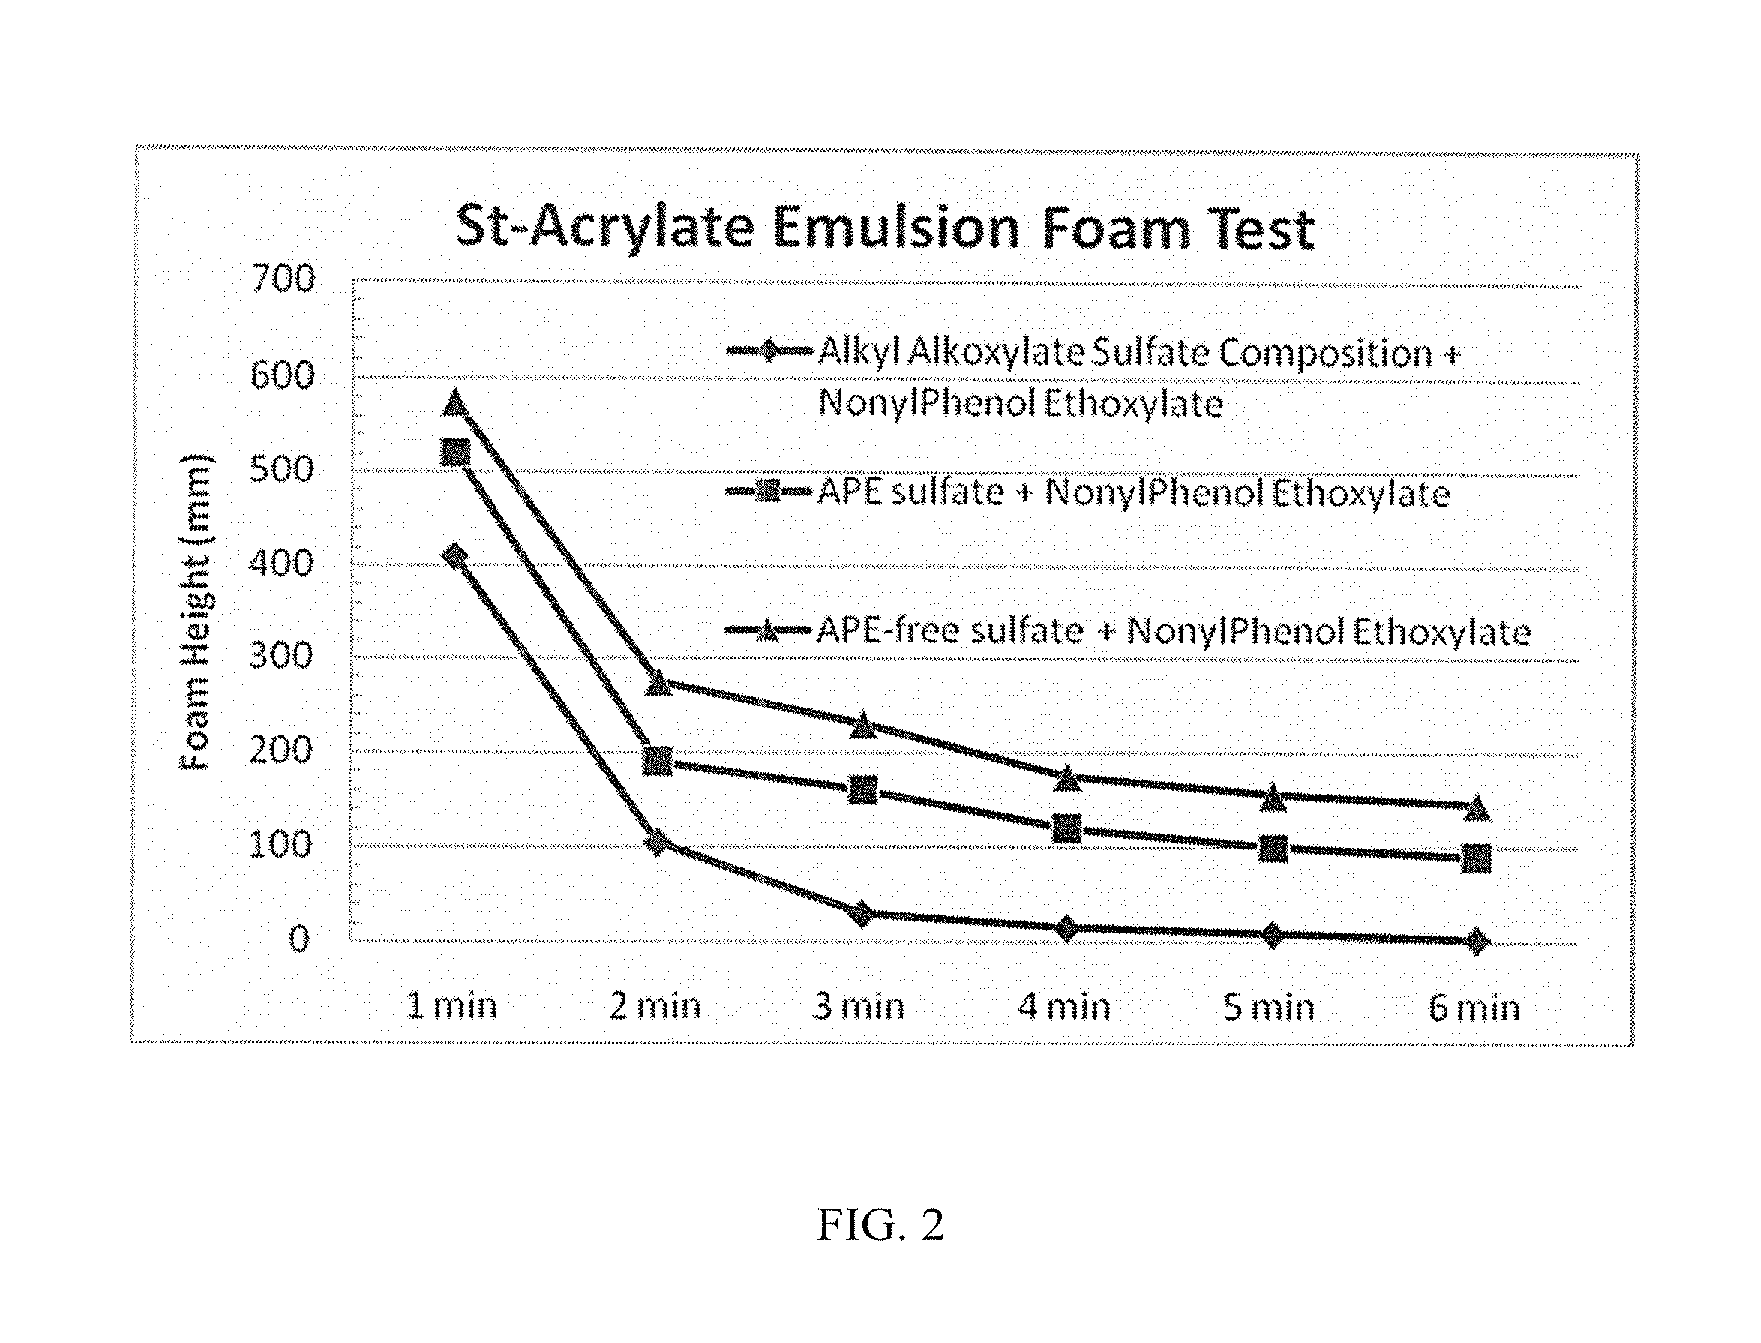 Anionic surfactant compositions and use thereof